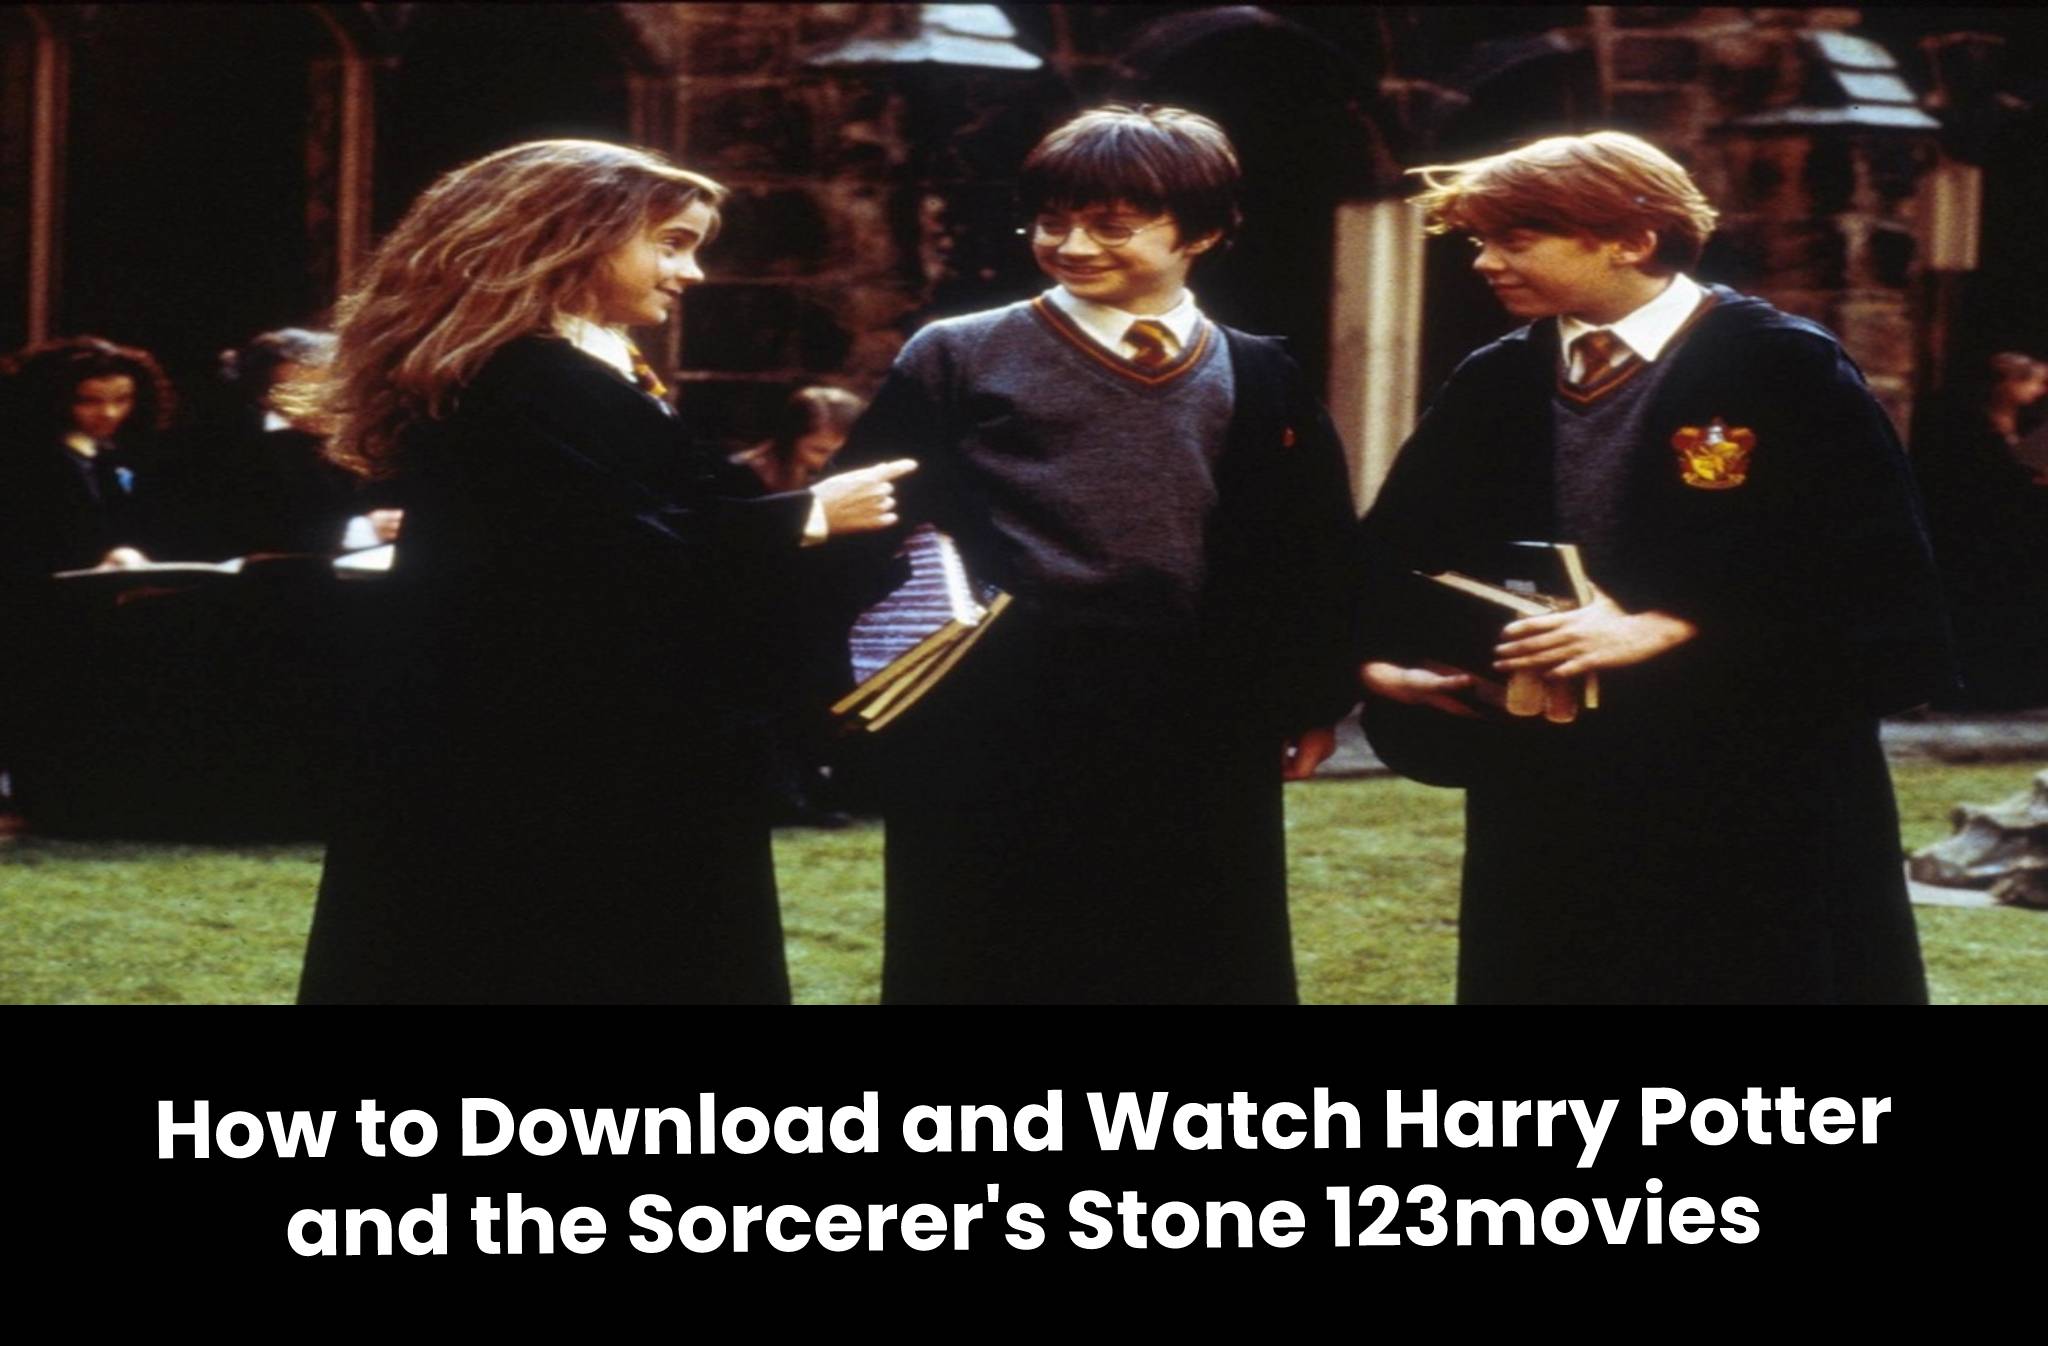 How to Download and Watch Harry Potter and the Sorcerer's Stone 123movies